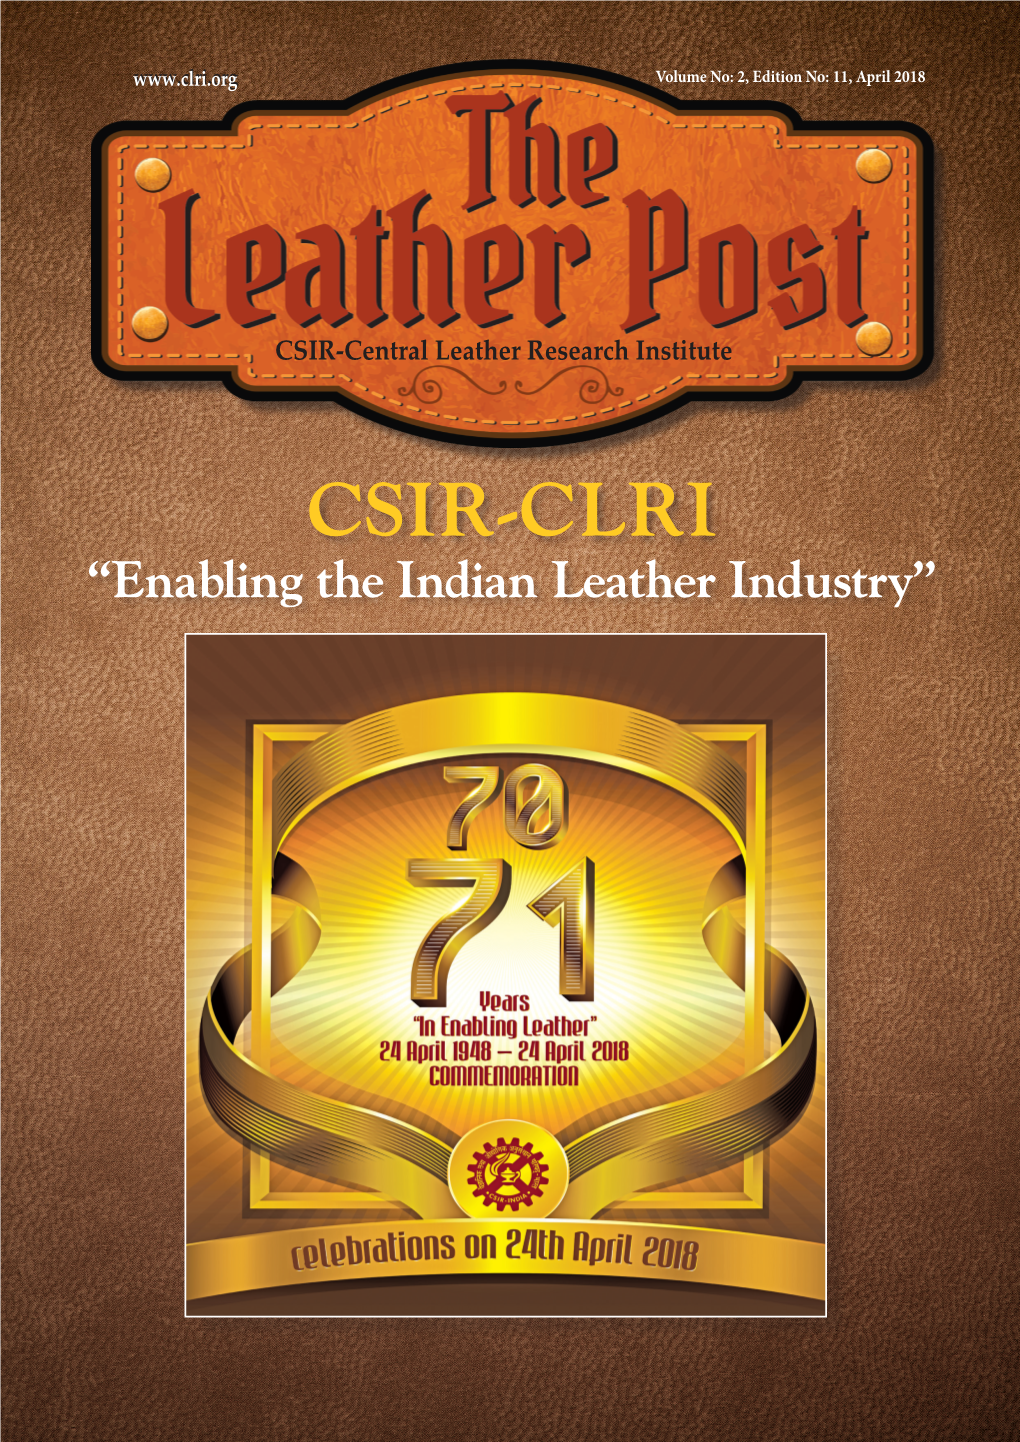 CSIR-CLRI “Enabling the Indian Leather Industry”